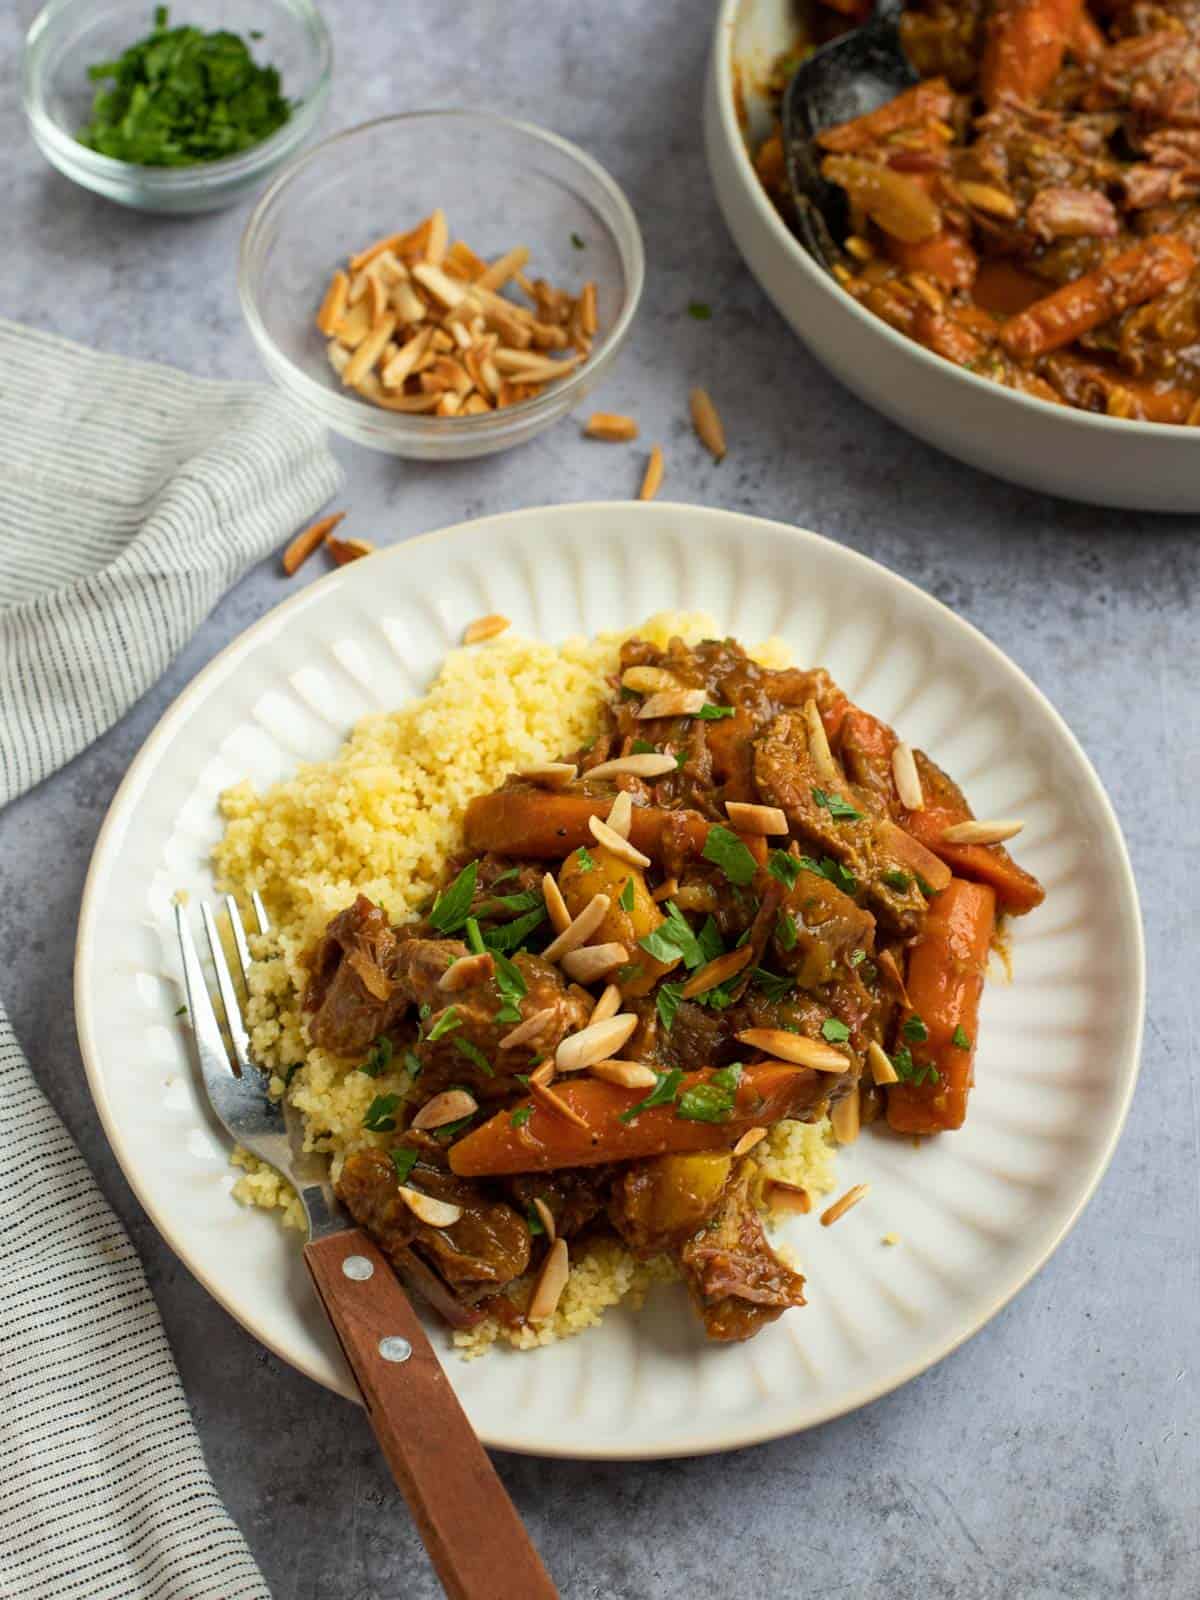 Slow cooker lamb tagine served over couscous on a plate.